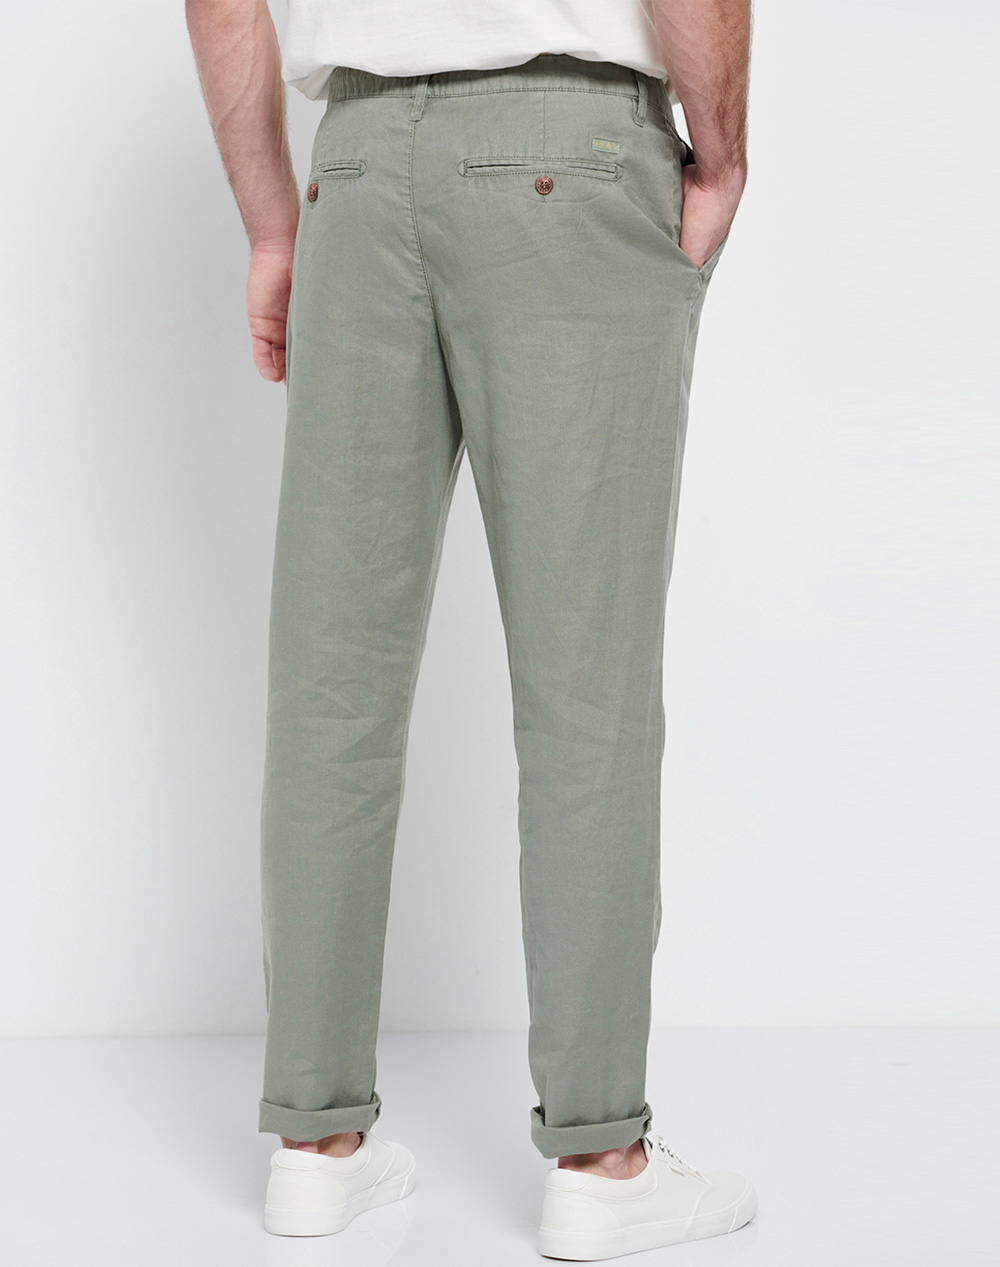 FUNKY BUDDHA Garment dyed λινό chino παντελόνι